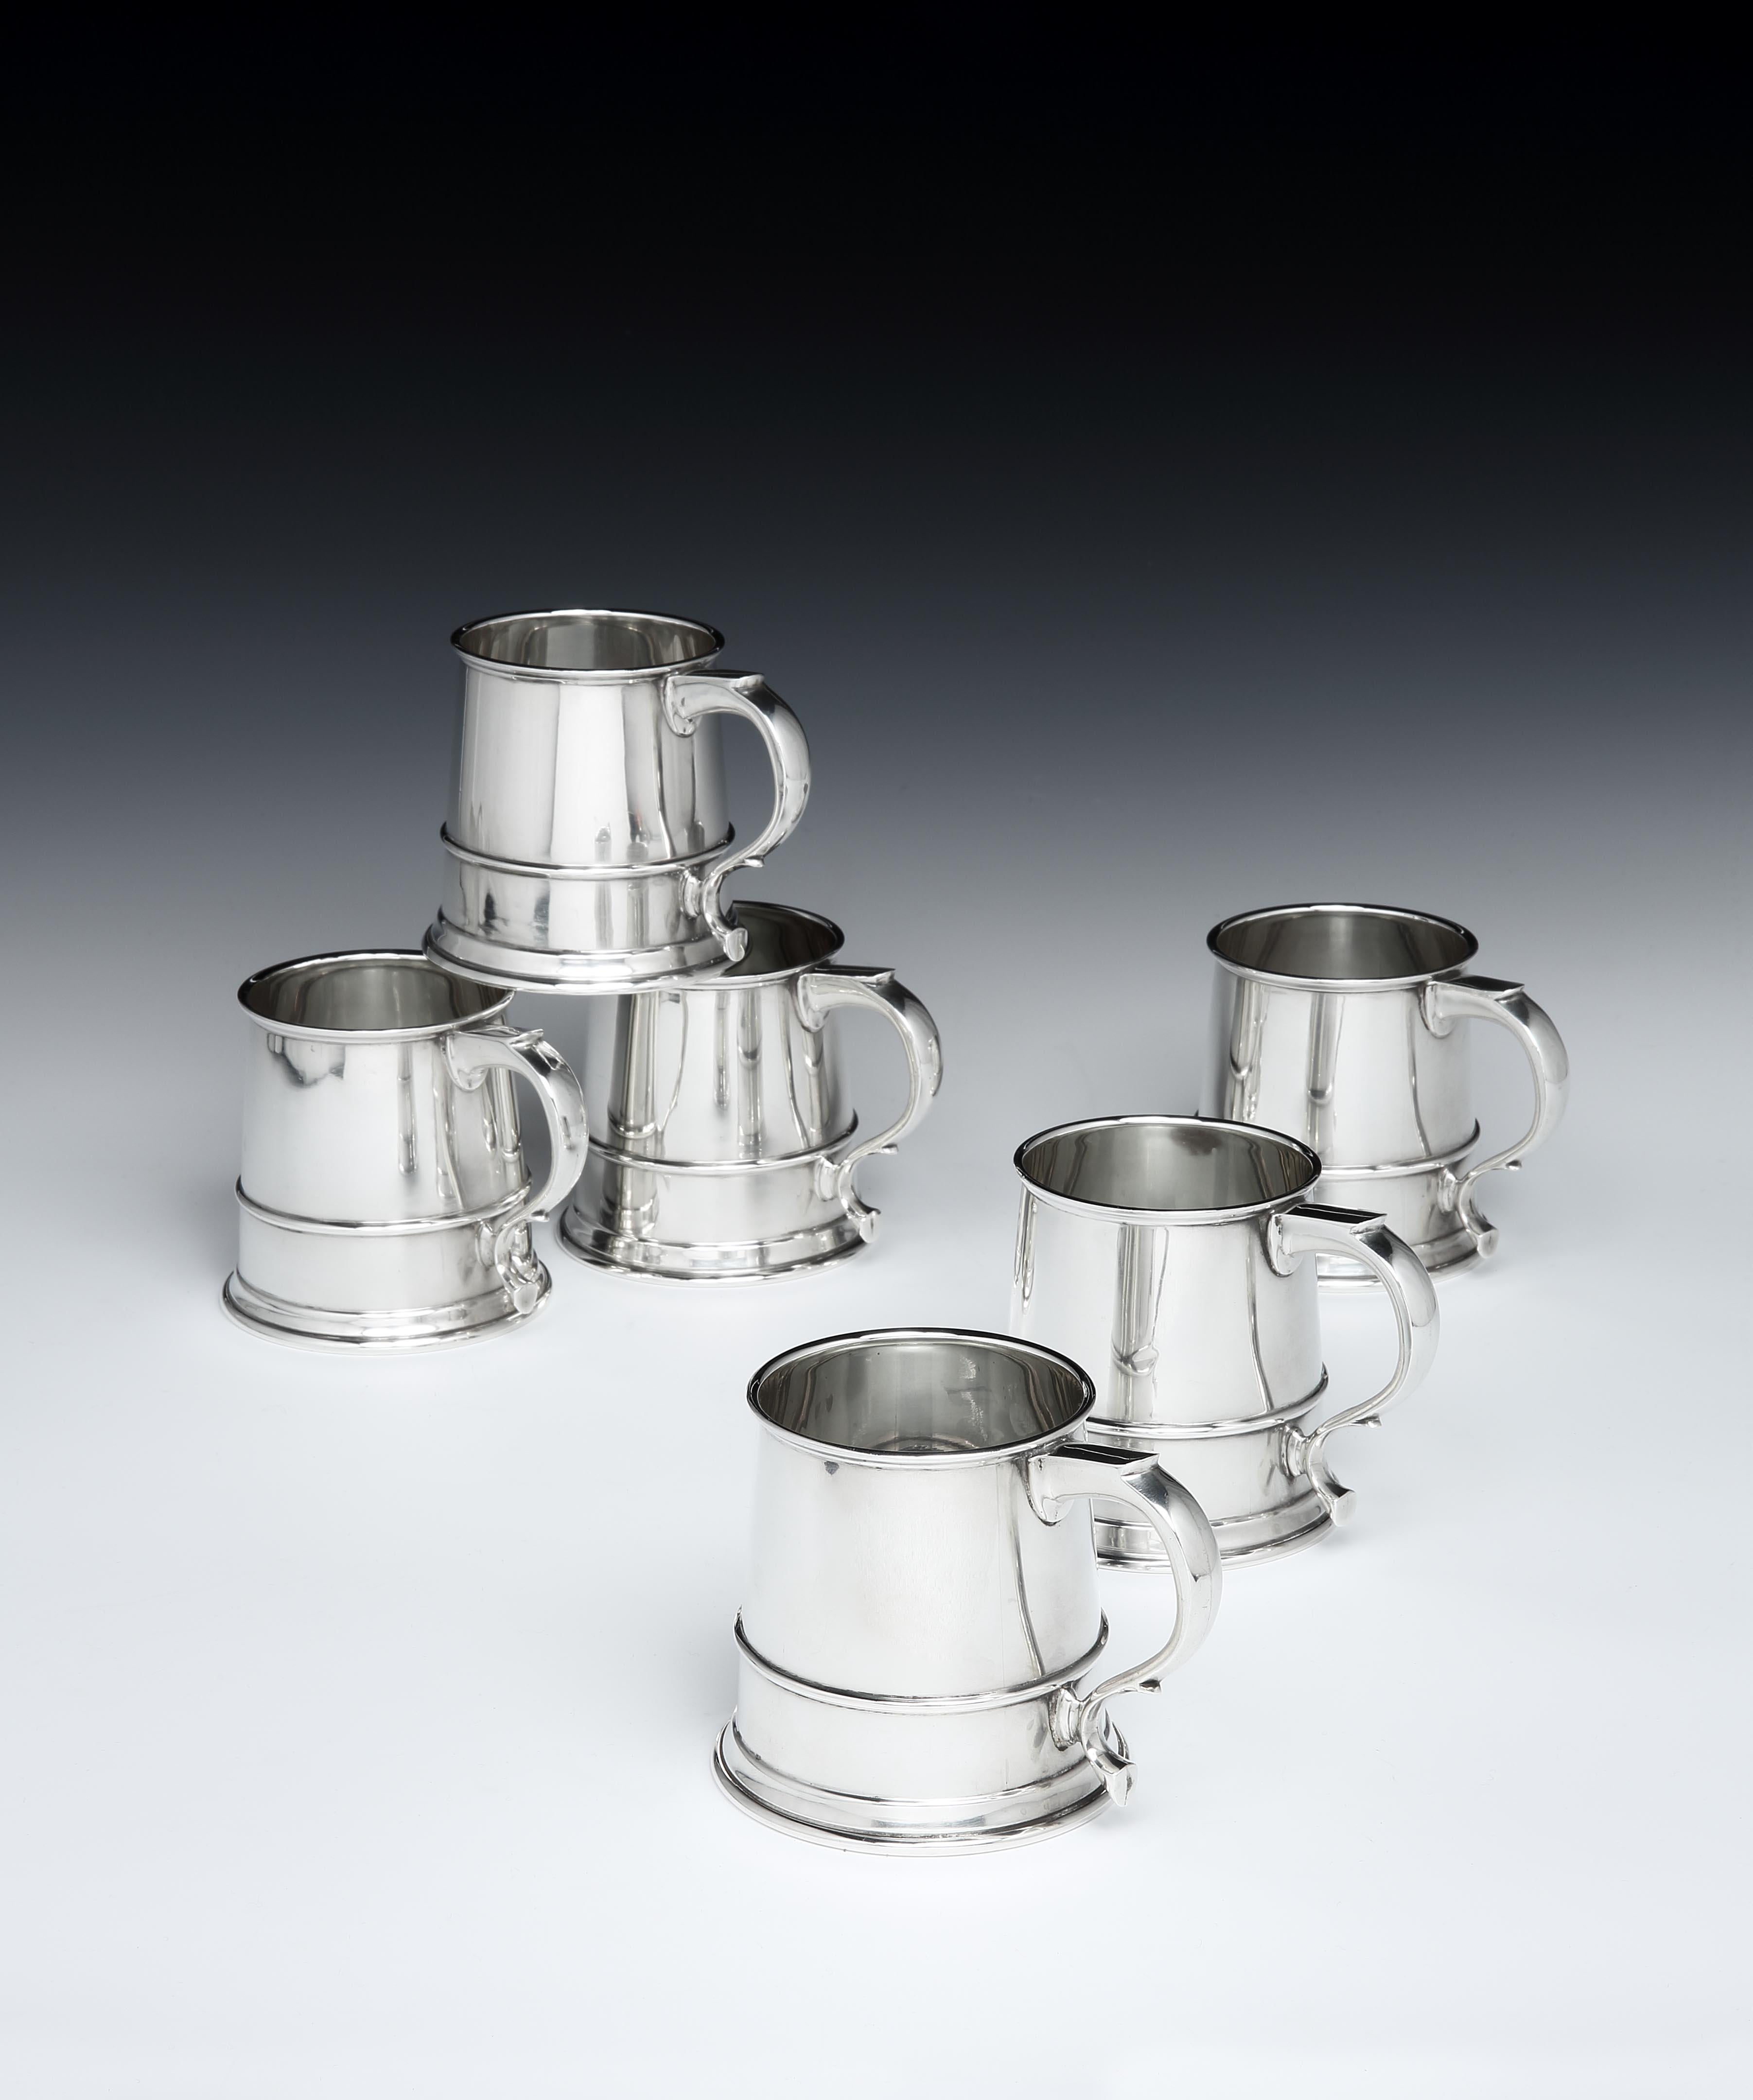 why do tankards have glass bottoms